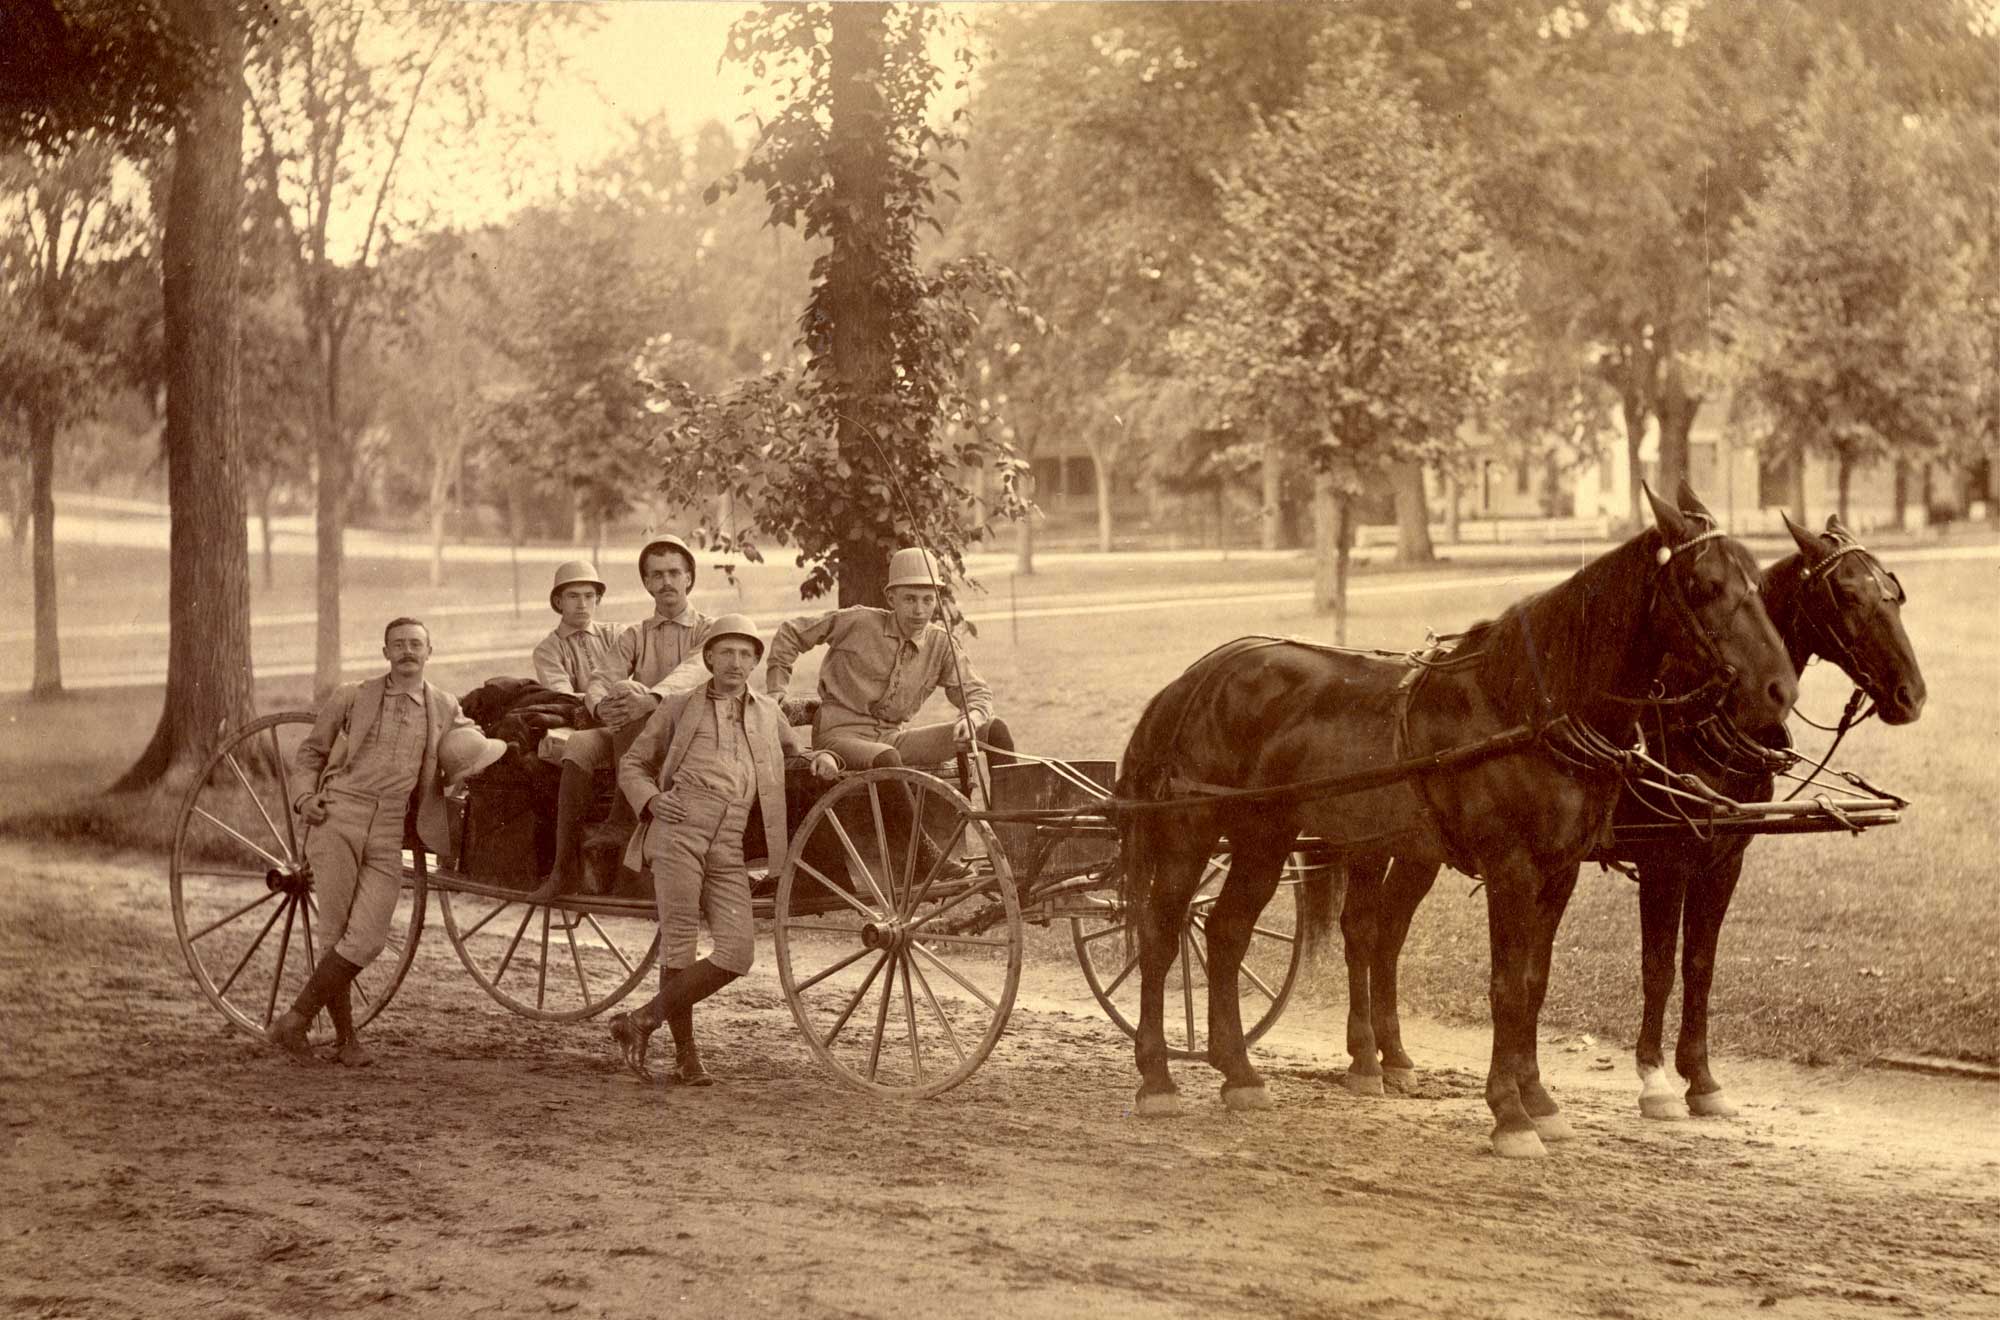 A horse dawn carriage with 5 men